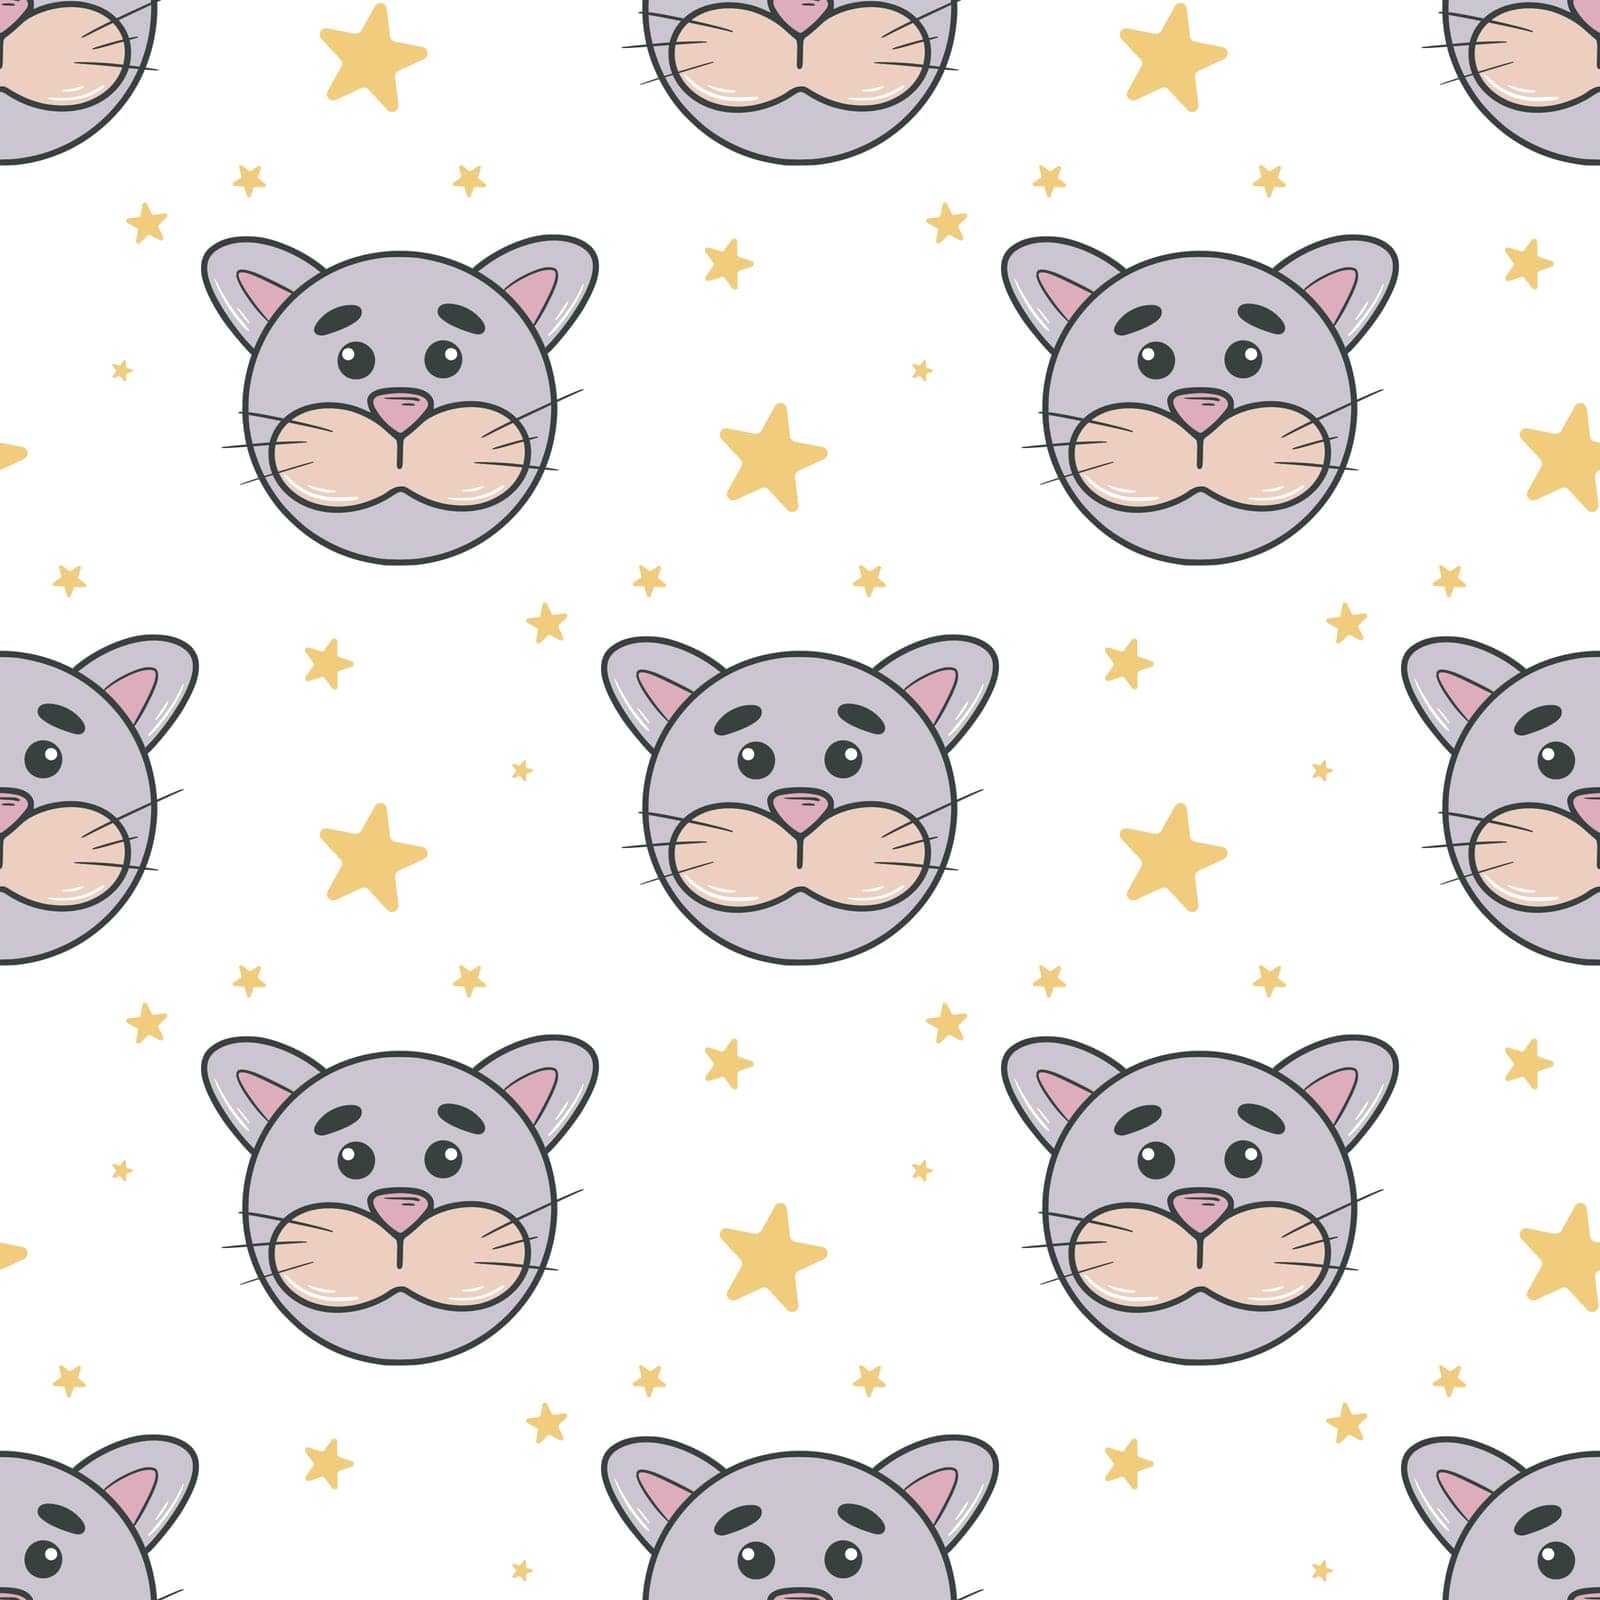 Cats and stars festive background. Kittens heads seamless pattern. Cute baby print for textiles, gift wrapping, design, vector illustration